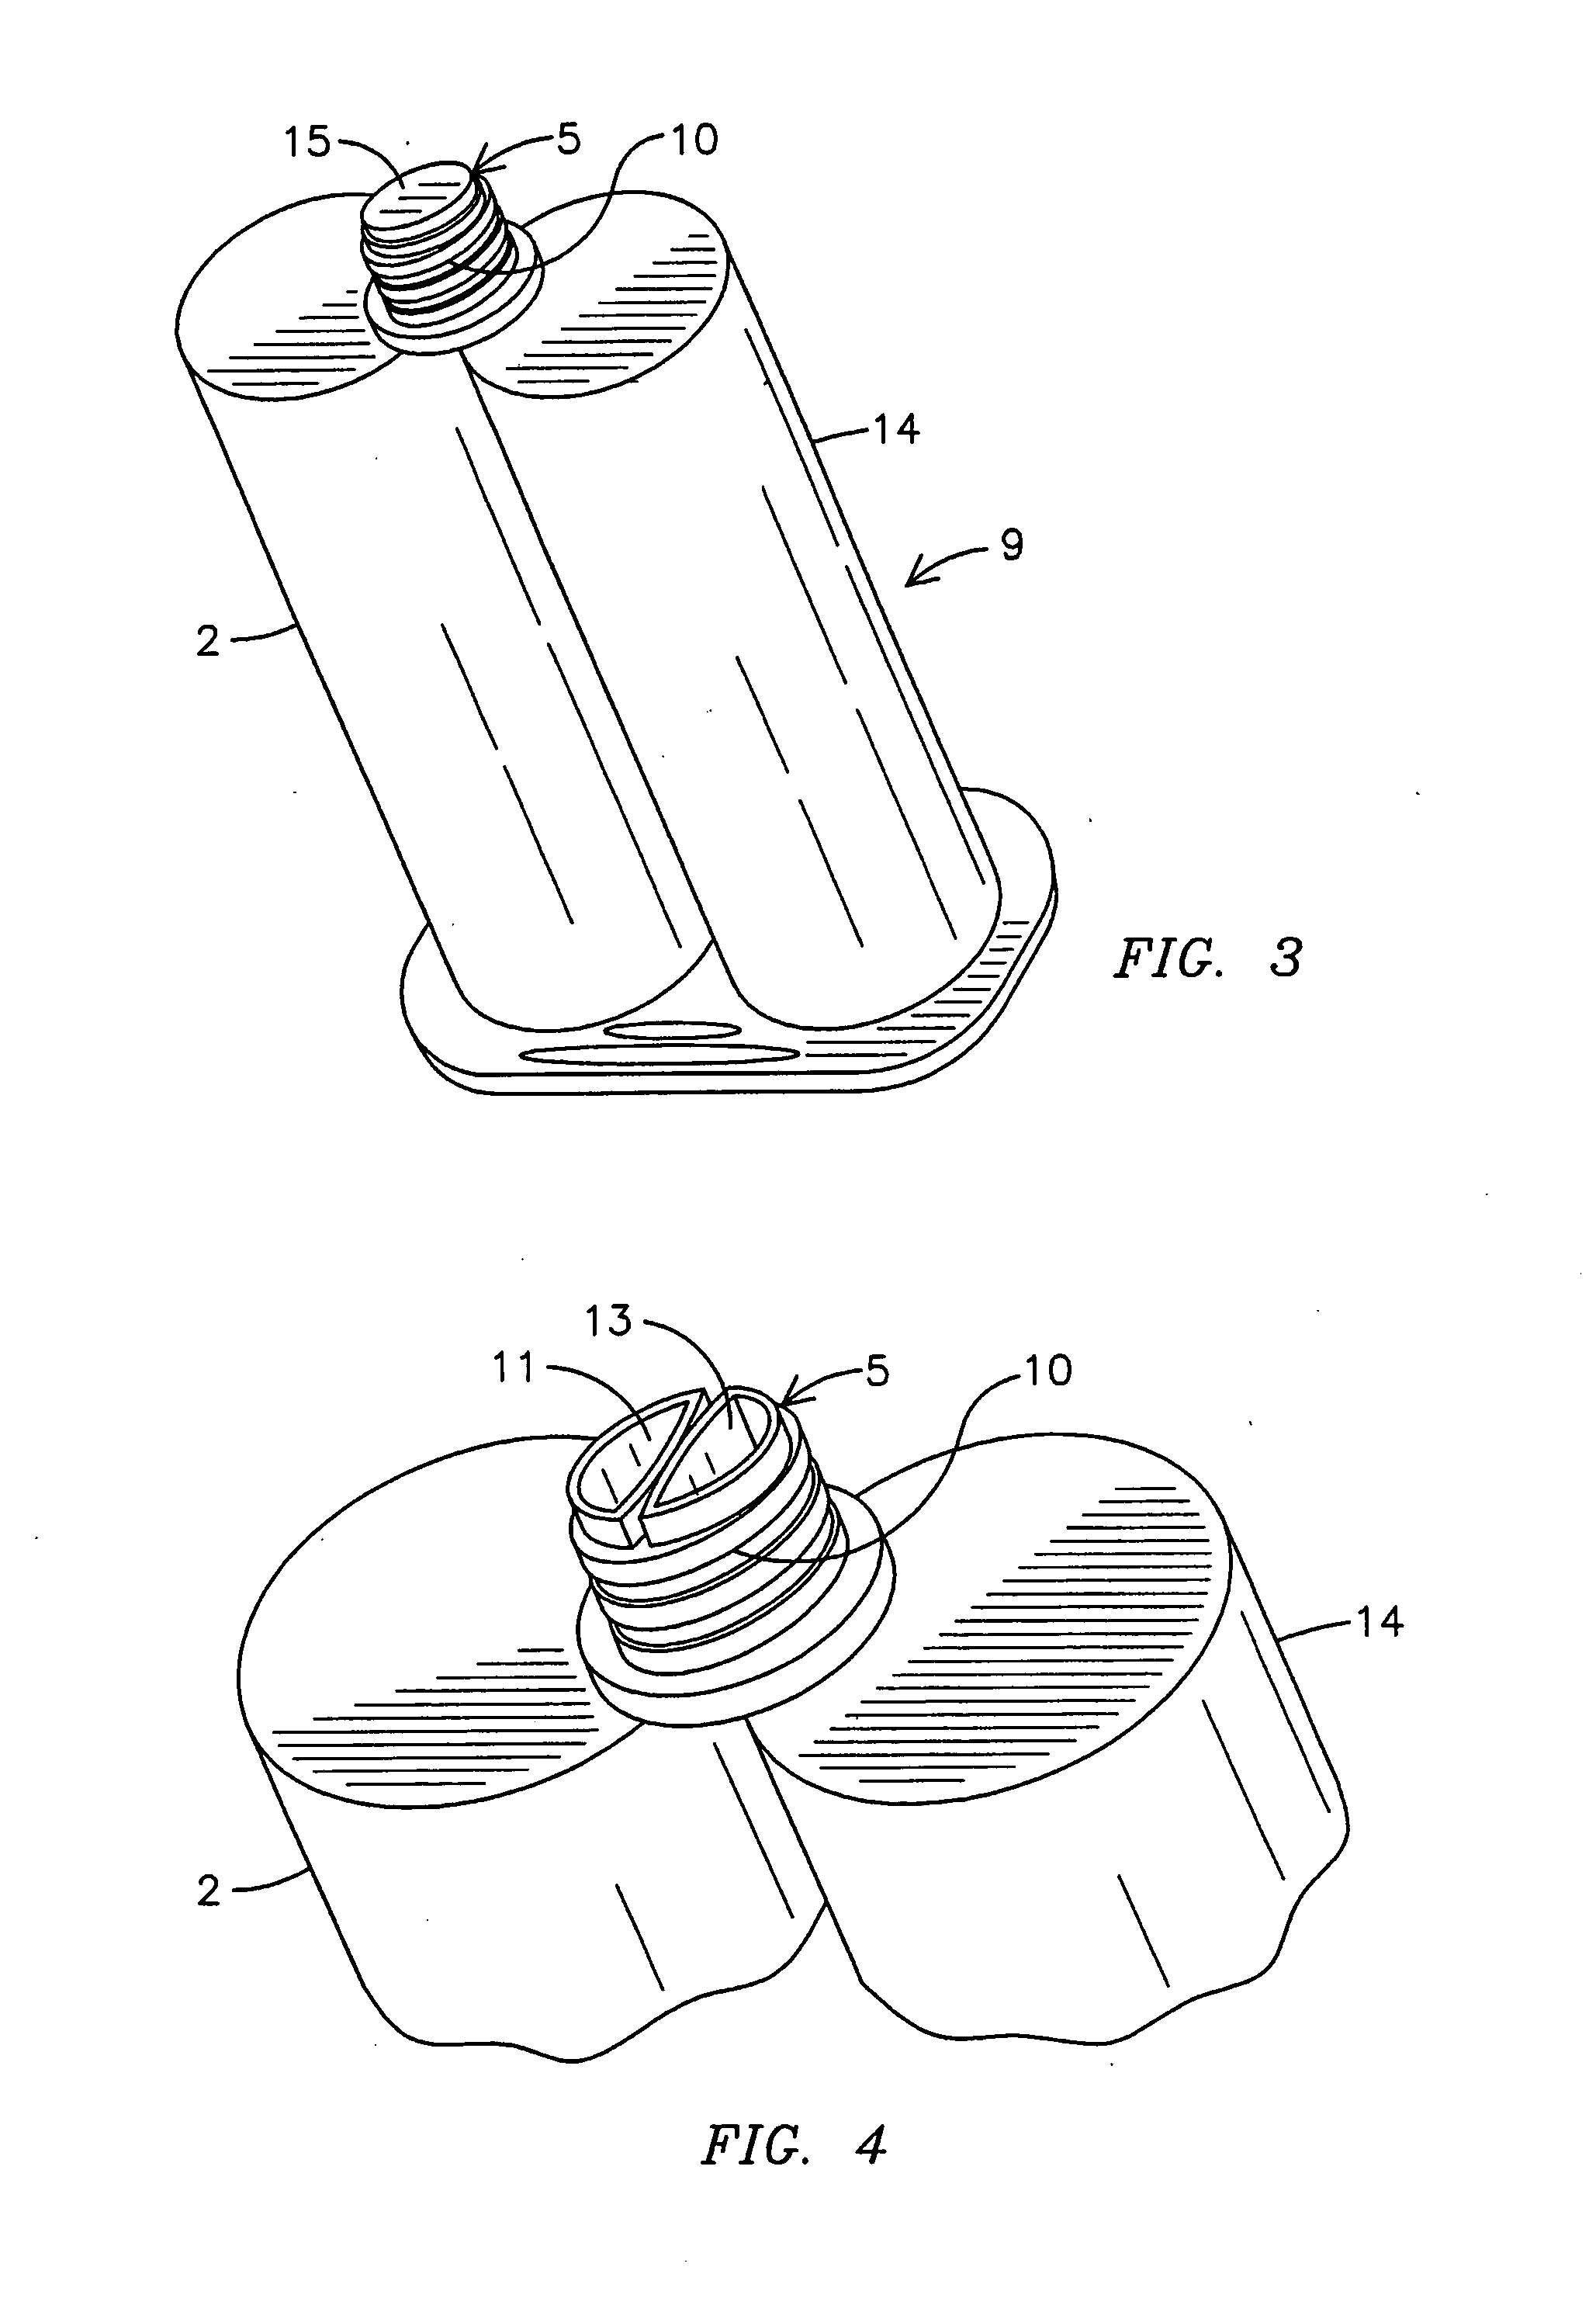 Antibacterial/anti-infalmmatory composition and method